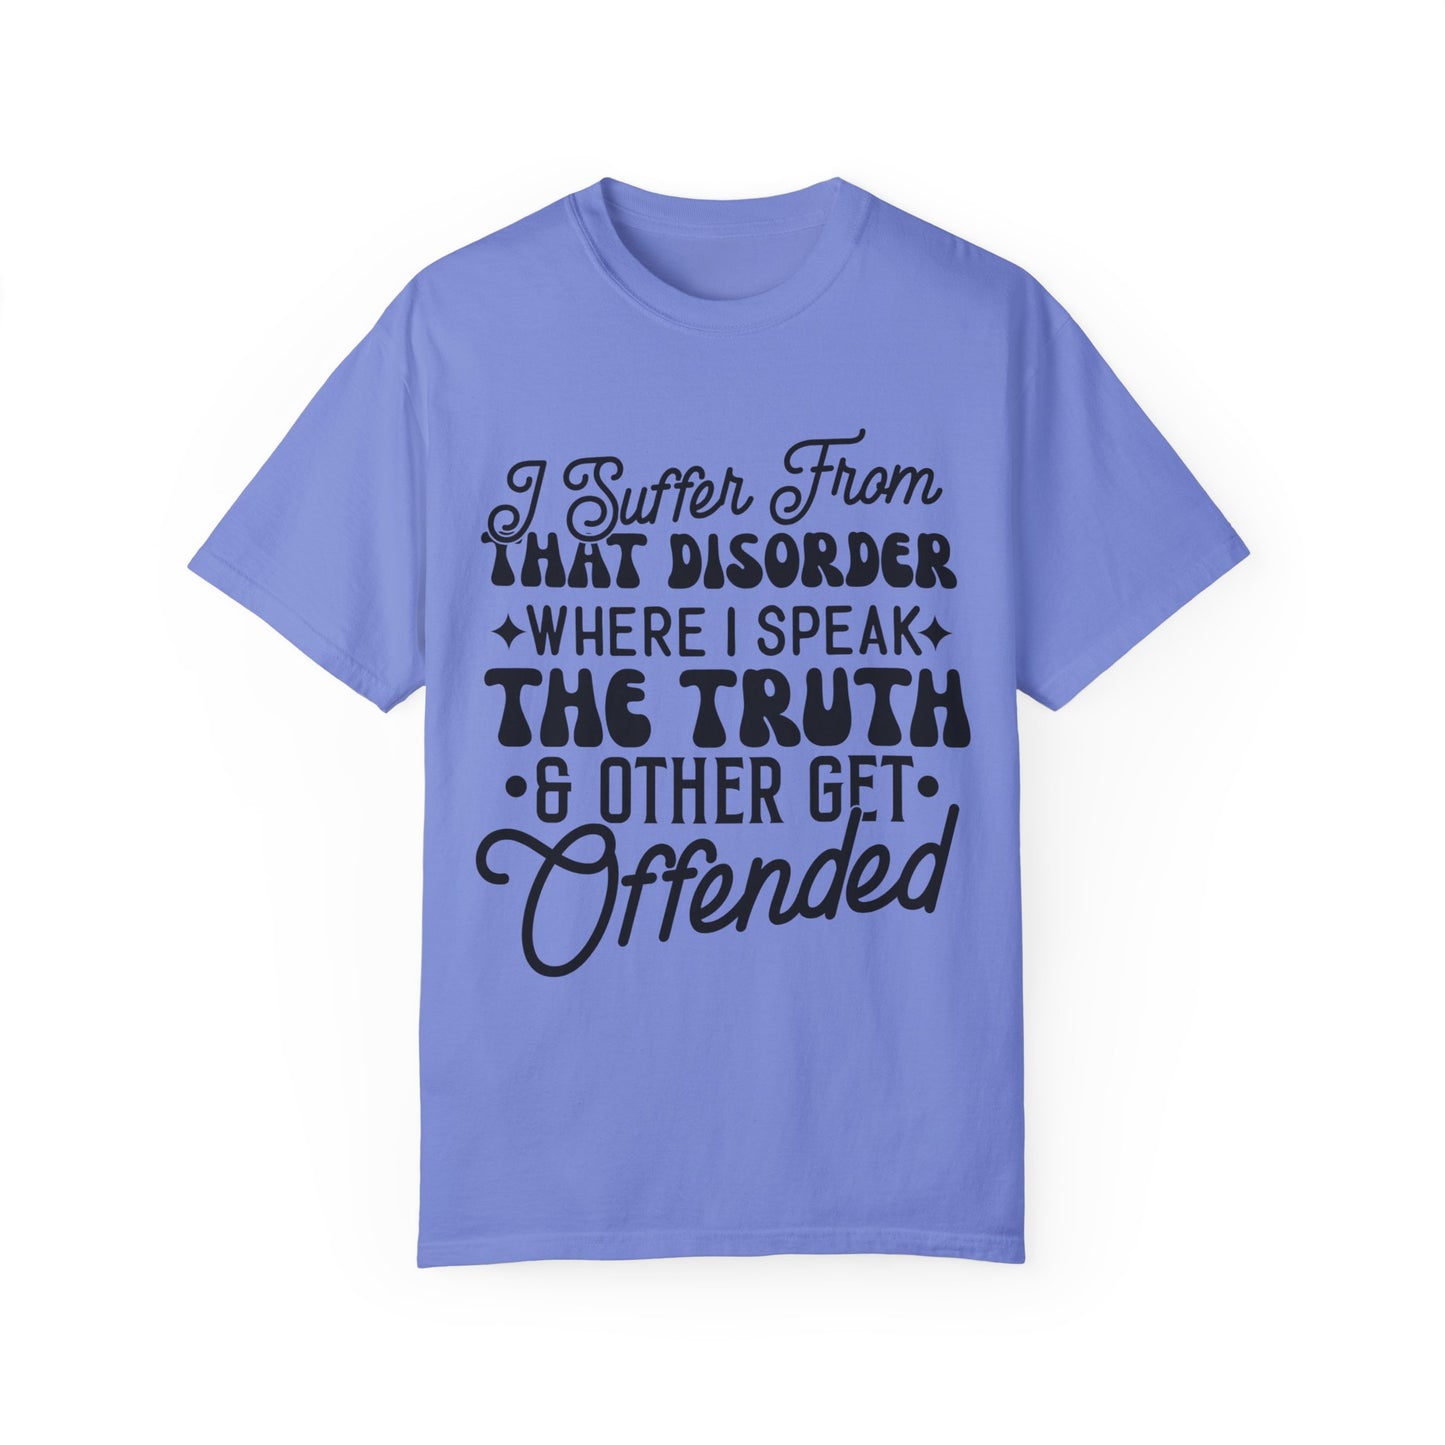 I suffer from disorder - Unisex Garment-Dyed T-shirt